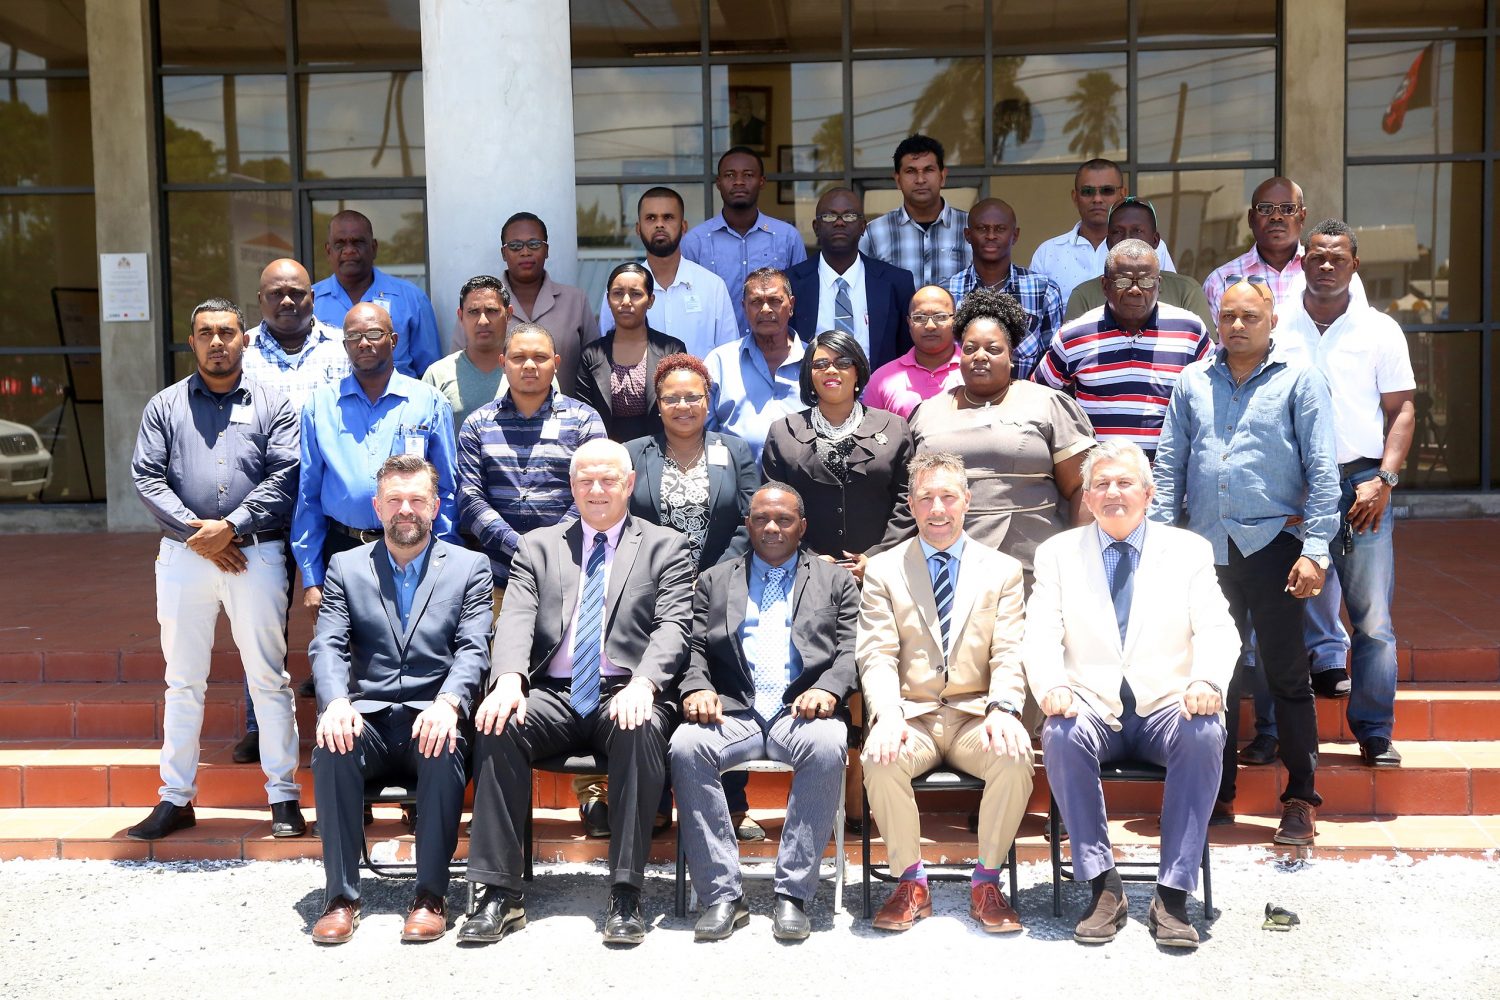 The participants pose for a group picture with (sitting from right to left) Security Reform Advisor to the President Russell Combe, Irish security expert Sam Sittlington, Crime Chief, Paul Williams and the UK-based facilitators Tony Crampton and Mark Dilliway.